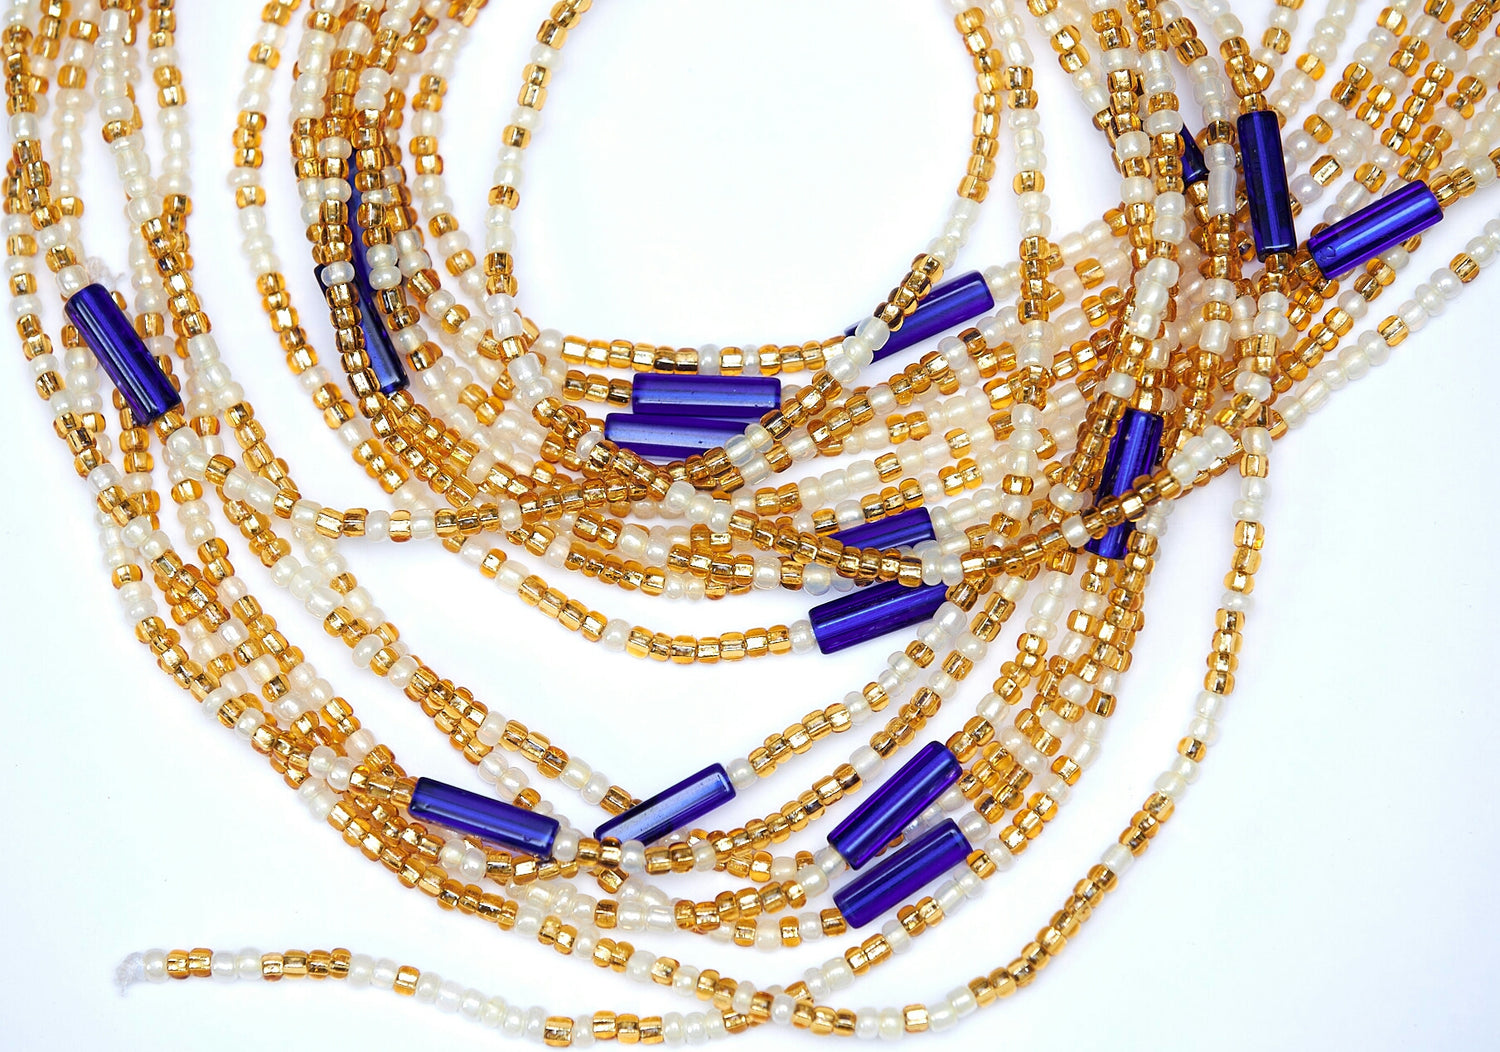 46 Inches White And Gold Beads With Deep Blue Pebble Bars Tie on Waist Beads 